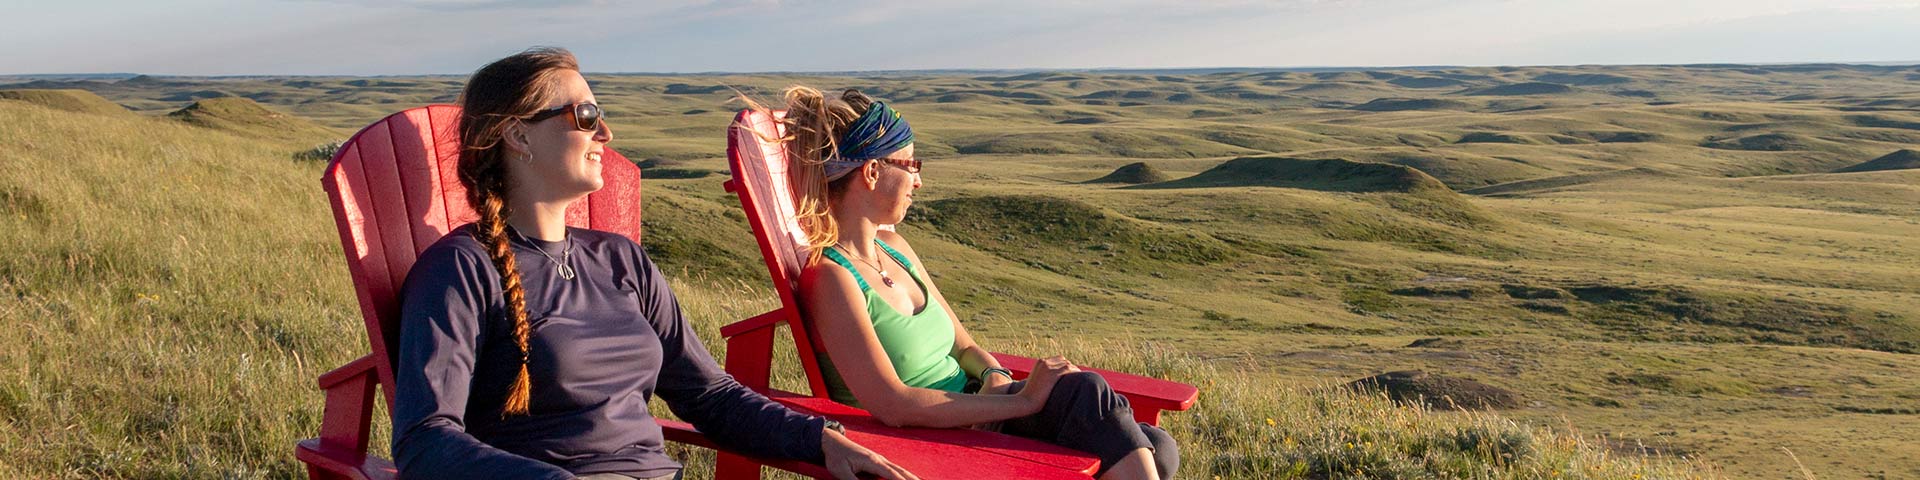 Enjoying the view of the Badlands from the red chairs in the East Block of Grasslands National Park